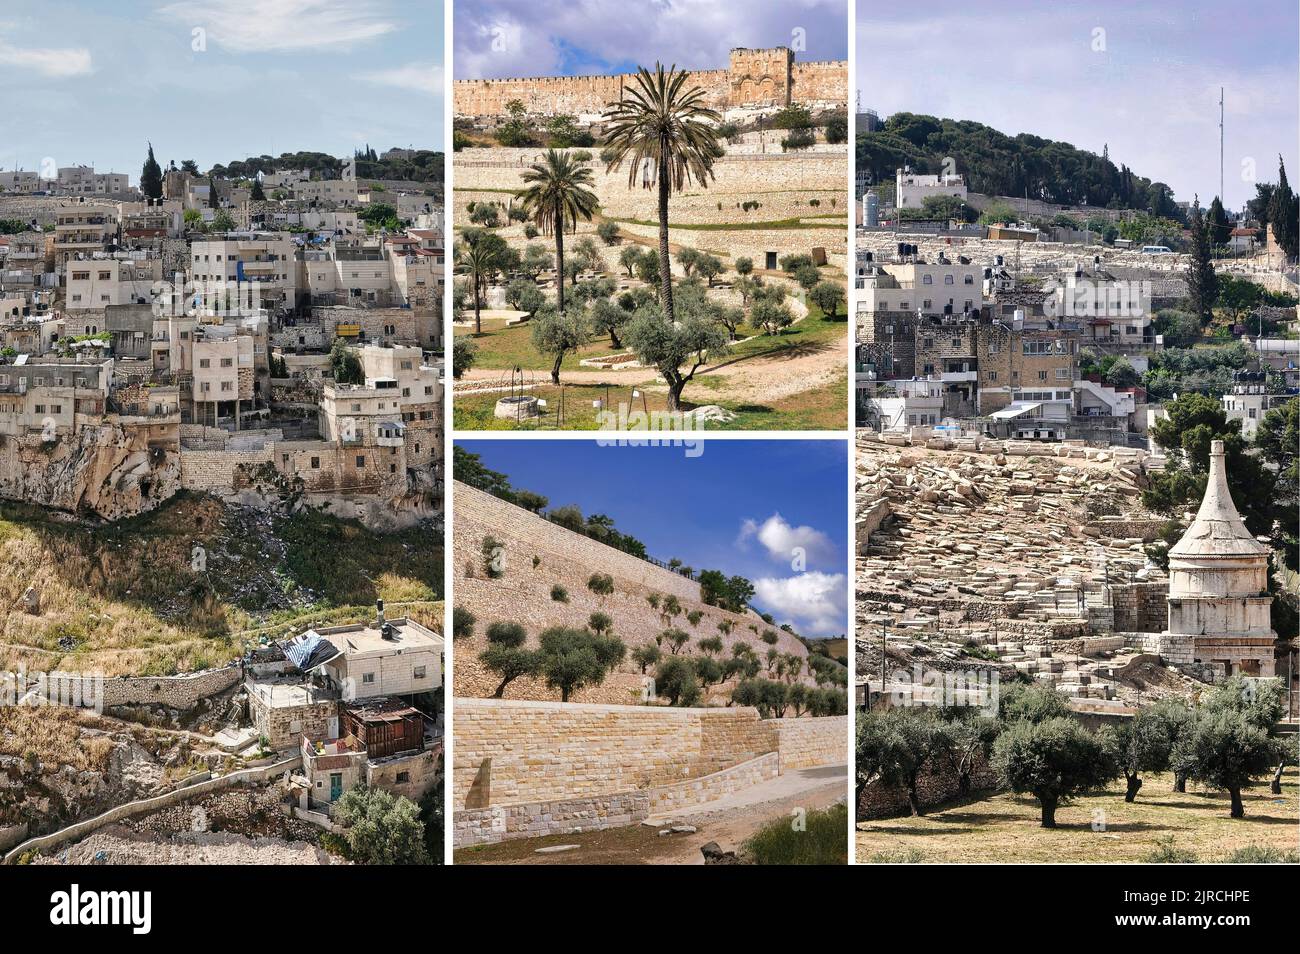 The Kidron Valley, a place of olive groves, ancient tombs and misnamed funerary monuments, divides Jerusalem's Temple Mount from the Mount of Olives. Stock Photo